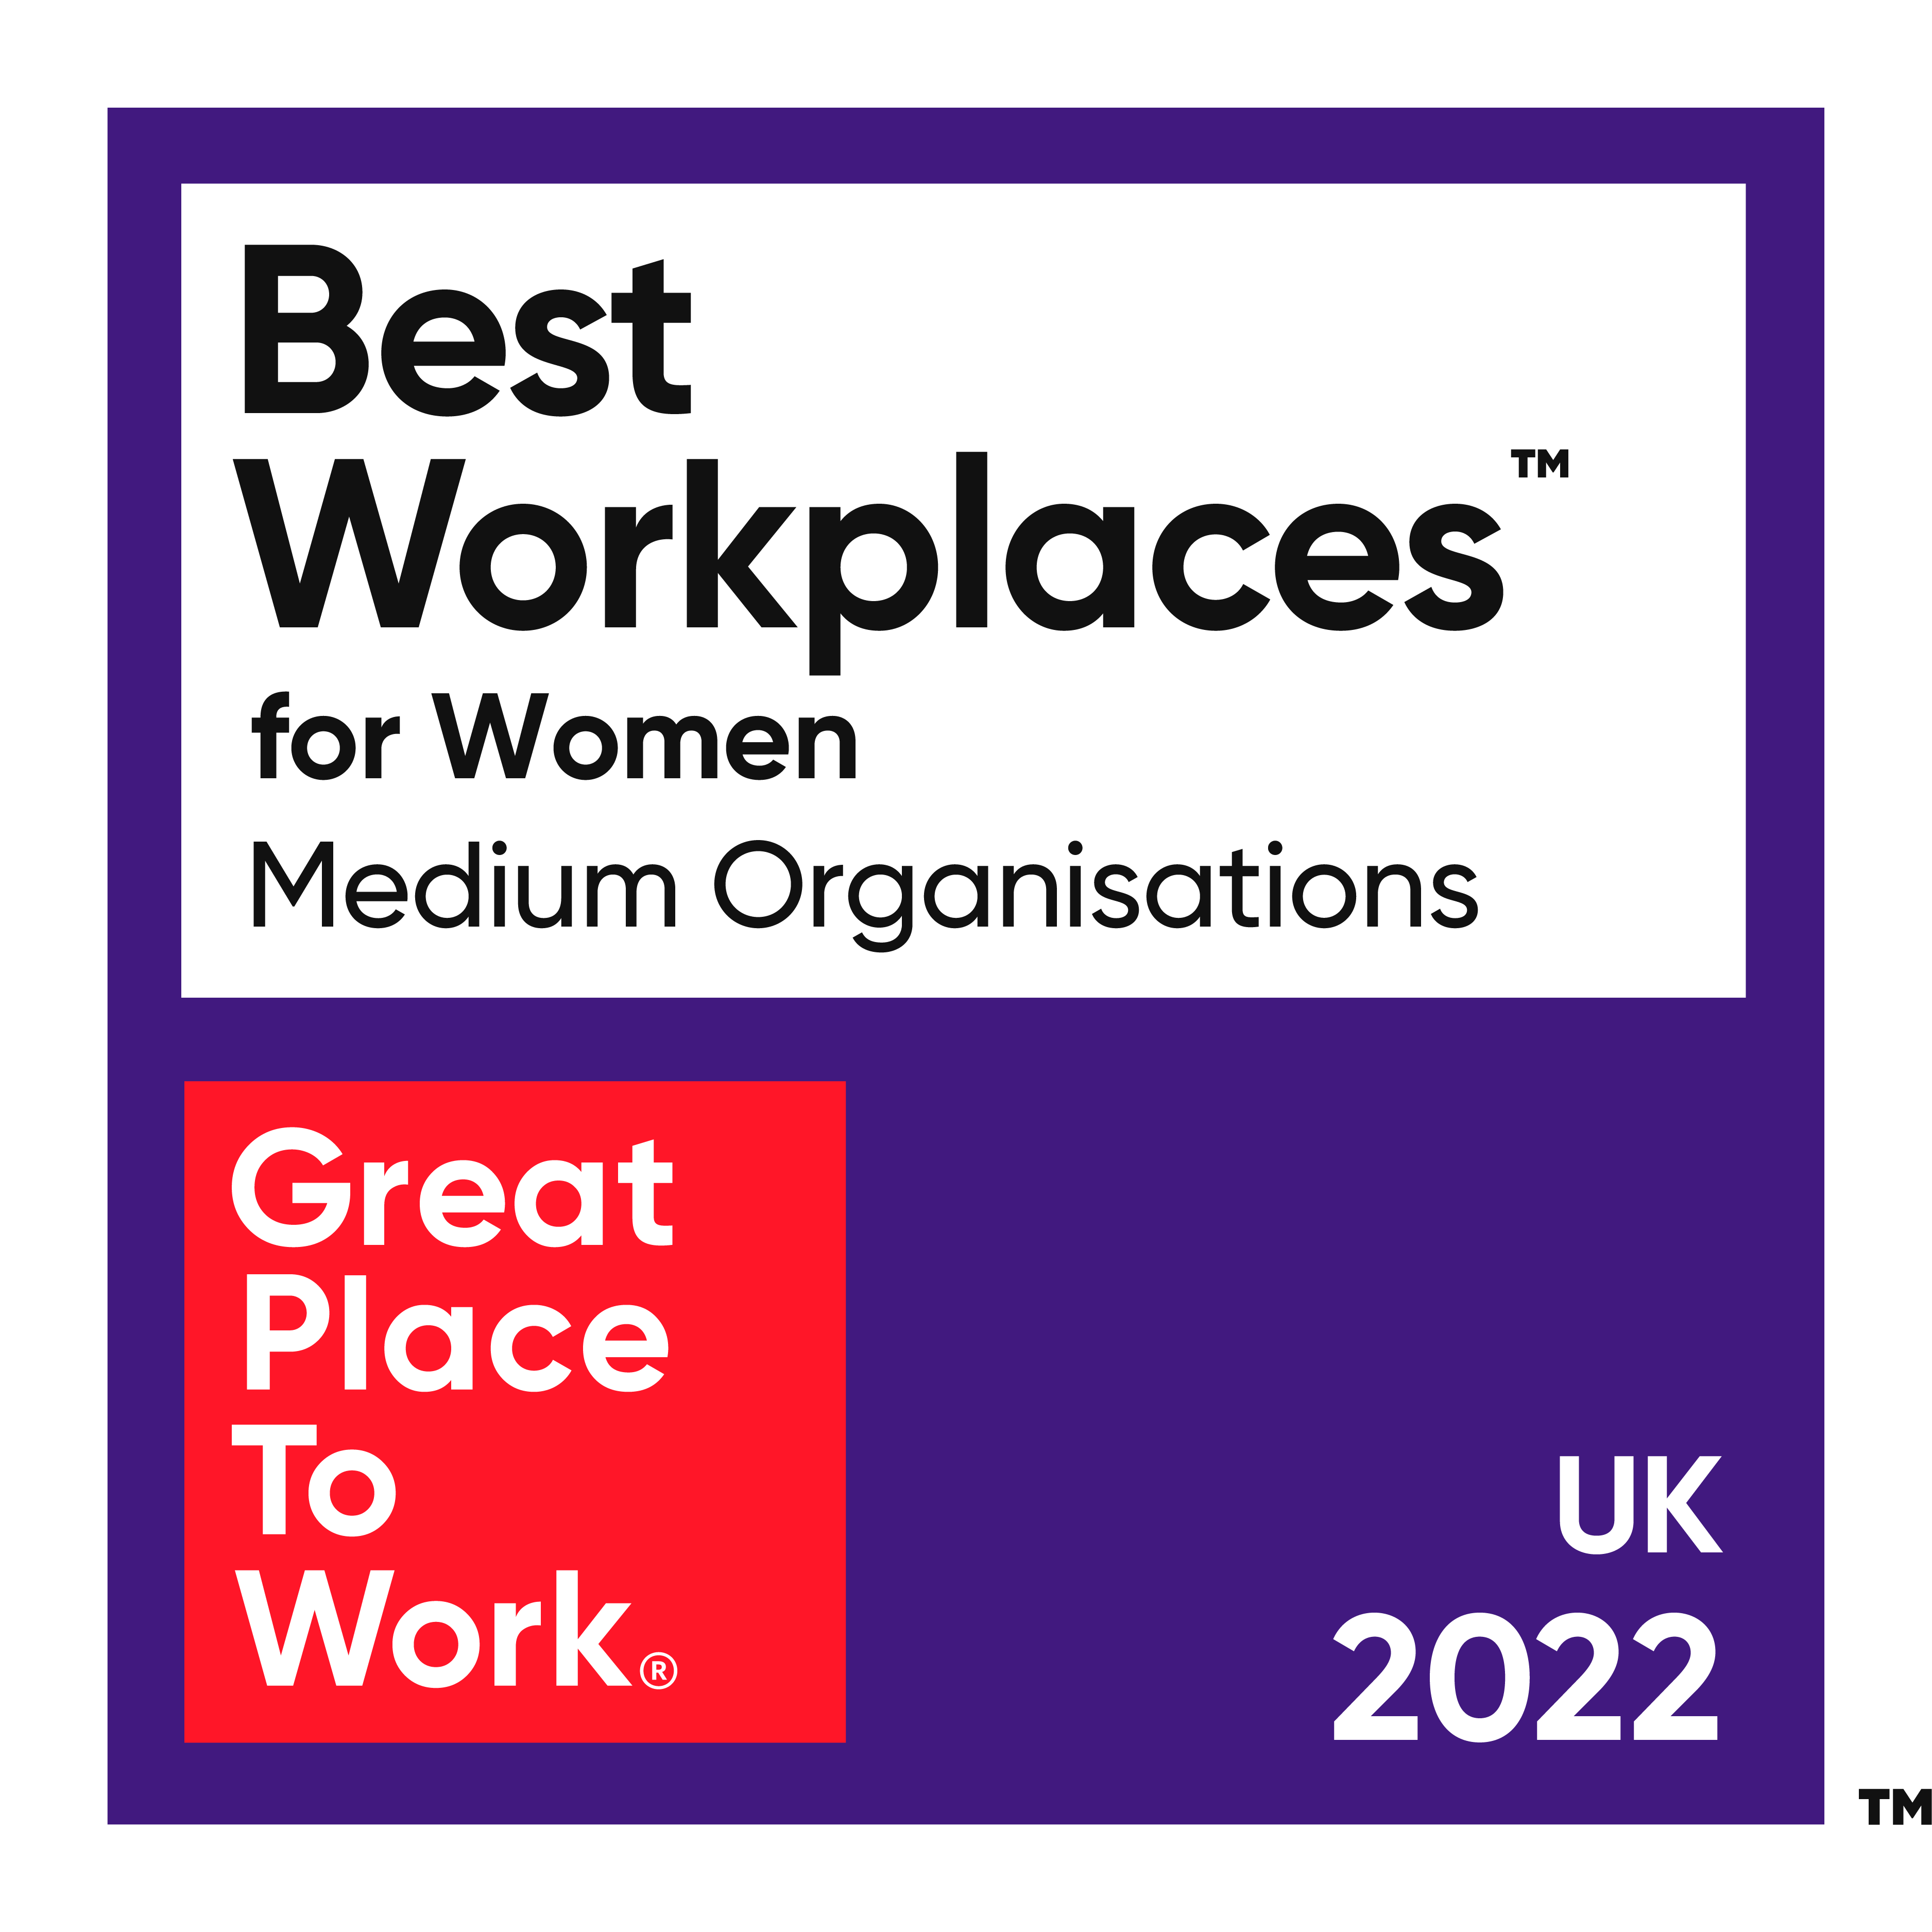 Best Workplaces For Women Medium Organisations in the UK